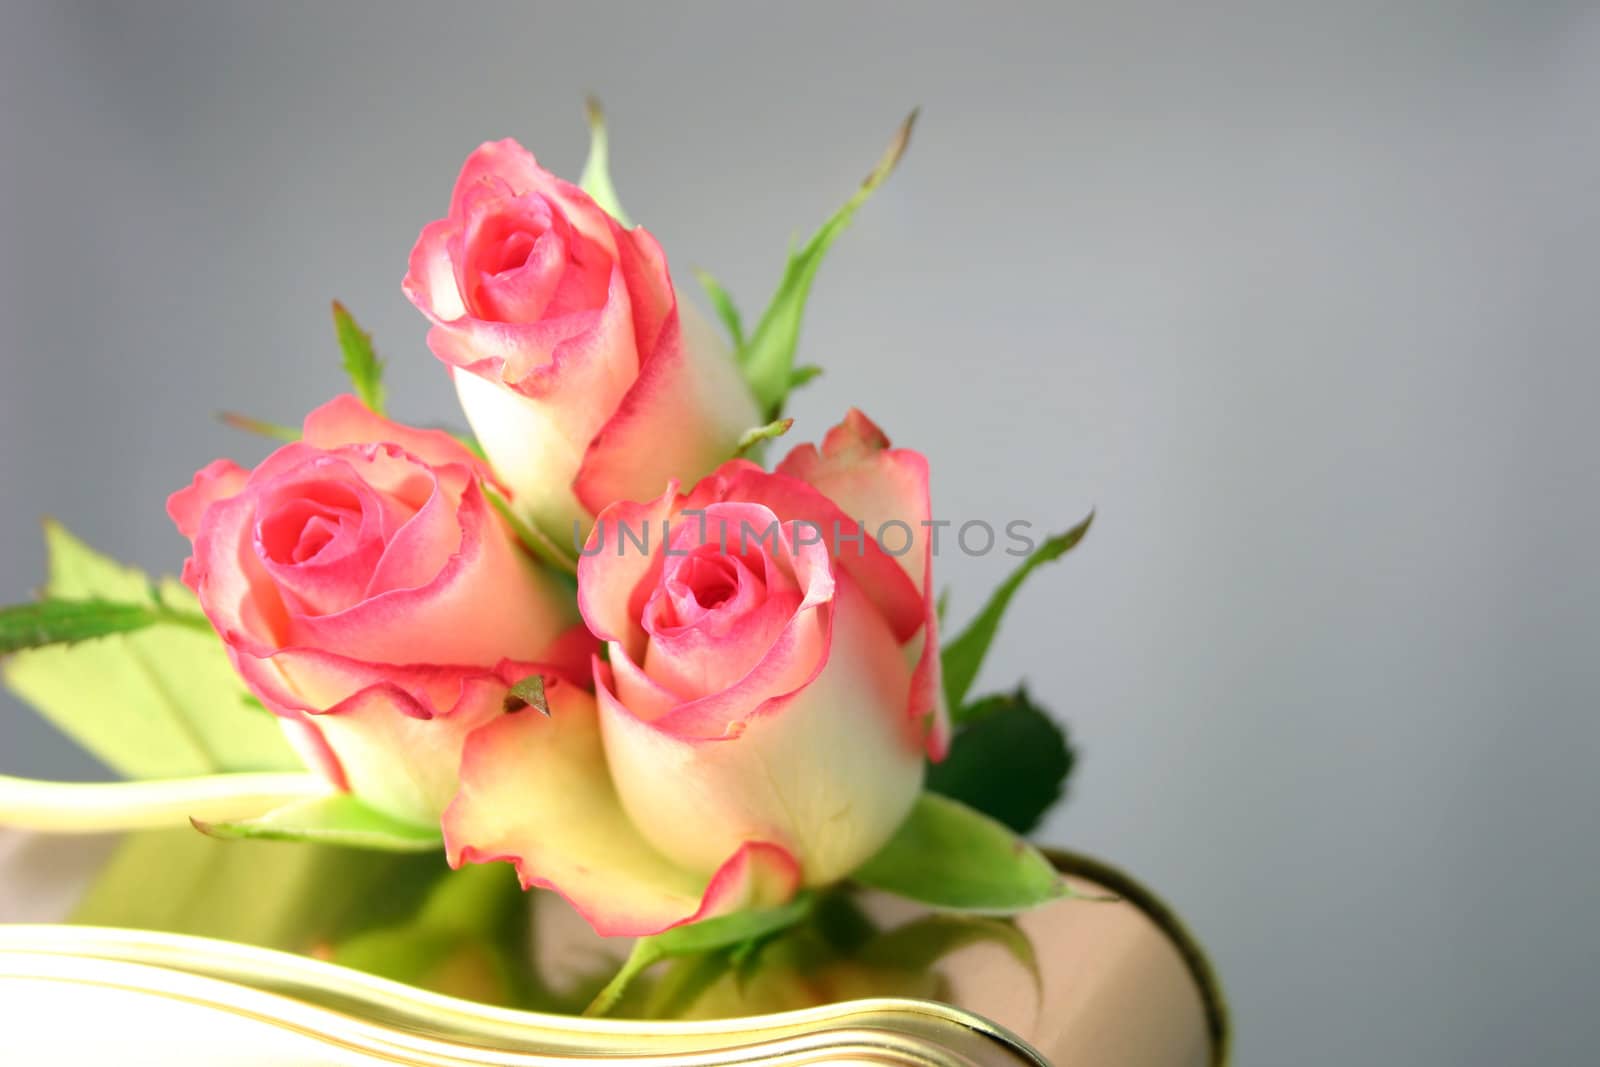 roses on a tin of chocolates over a grey background